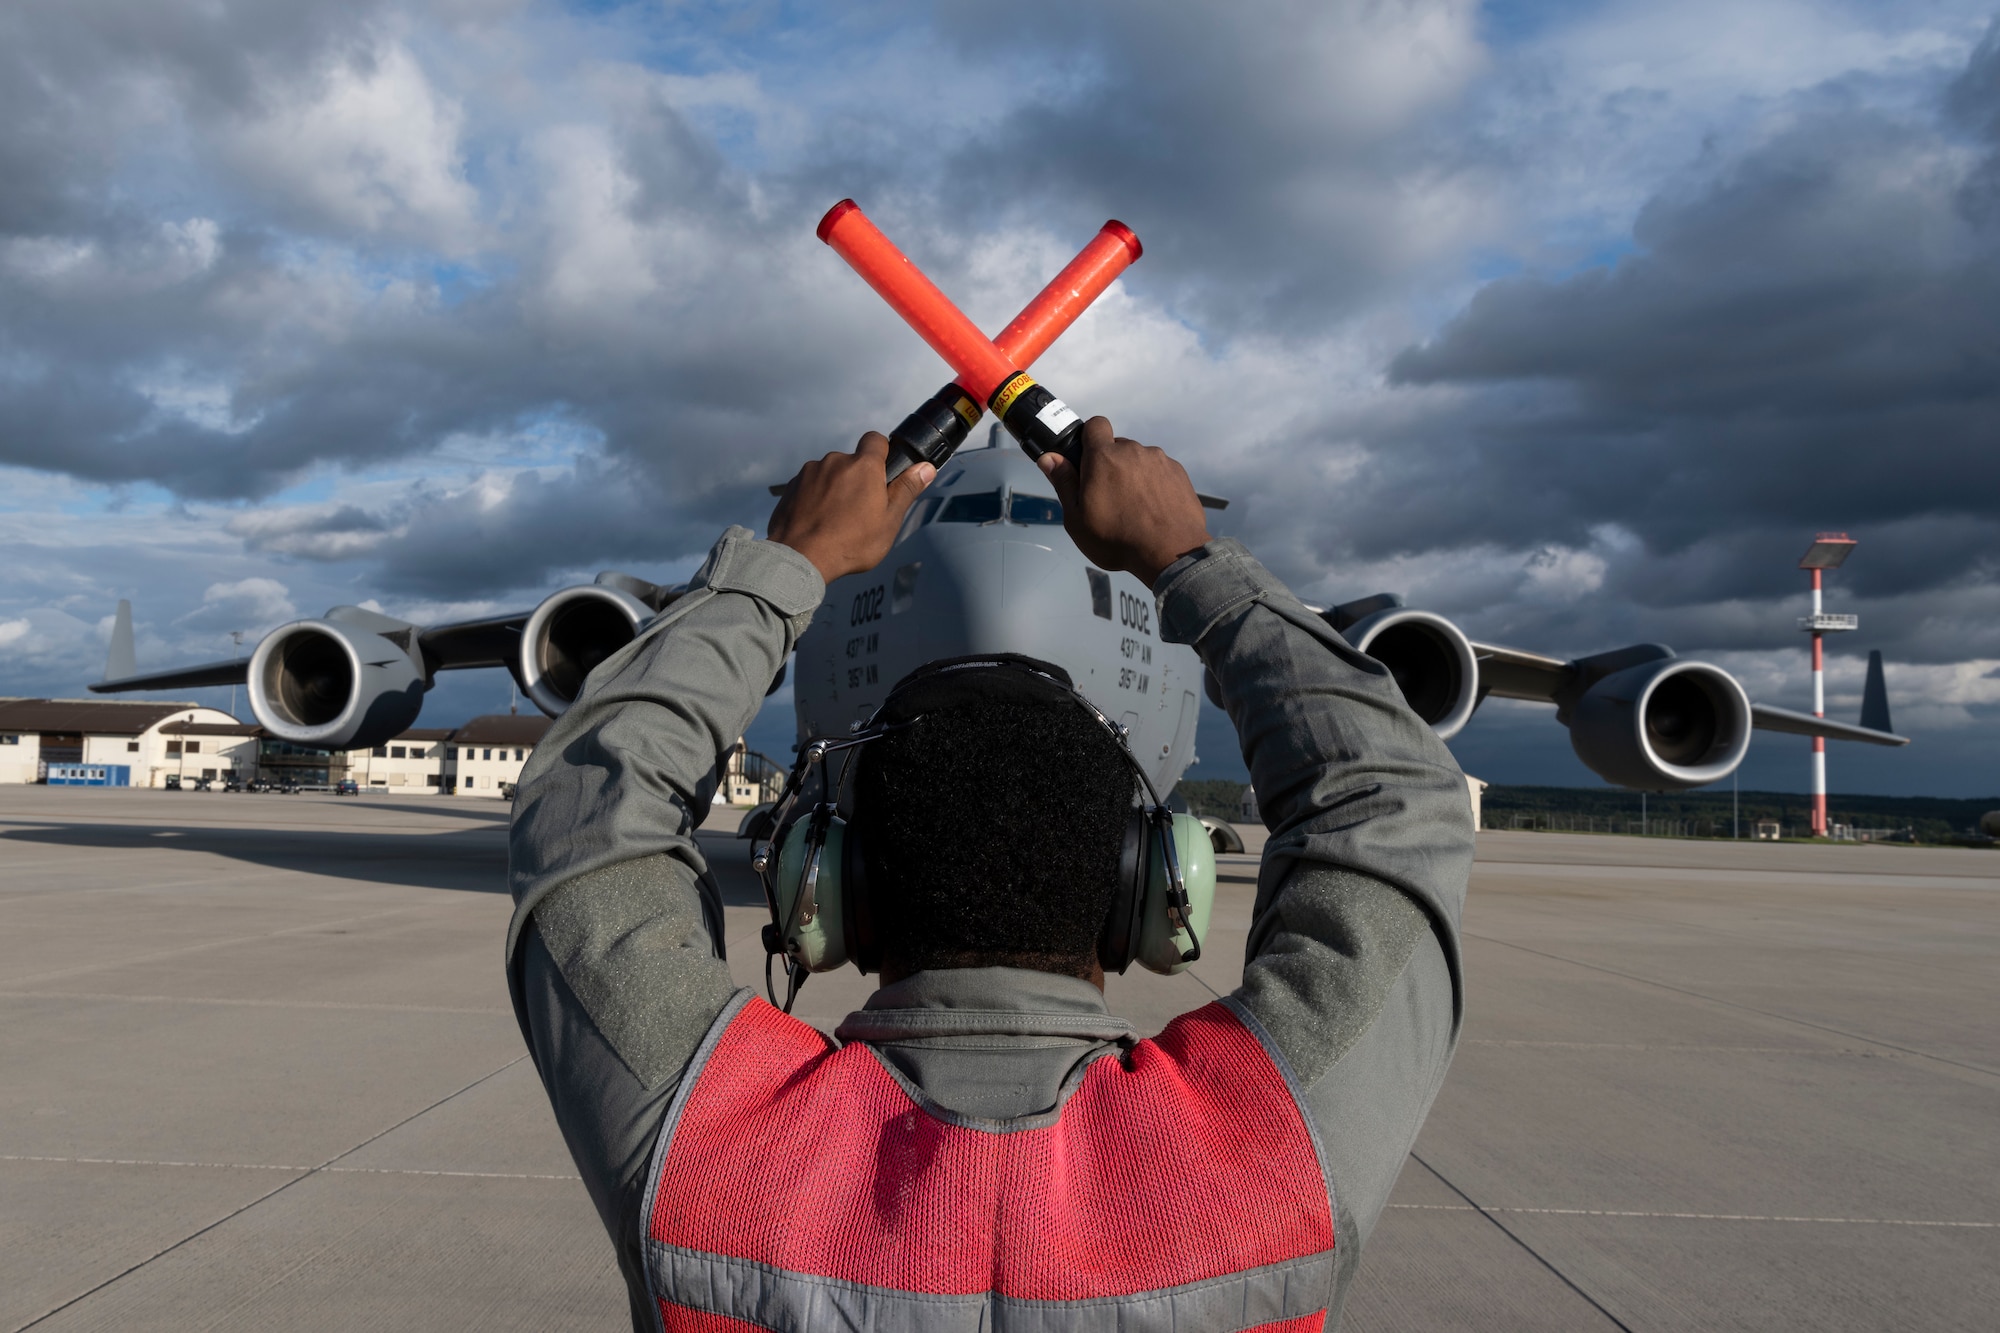 U.S. Air Force Senior Airman Leonard Bond, 726th Air Mobility Squadron aircraft electrical and environmental technician, marshals a U.S. Air Force C-17 Globemaster III cargo aircraft assigned to Joint Base Charleston, South Carolina, after it landed on Spangdahlem Air Base, Germany, Aug. 27, 2021.